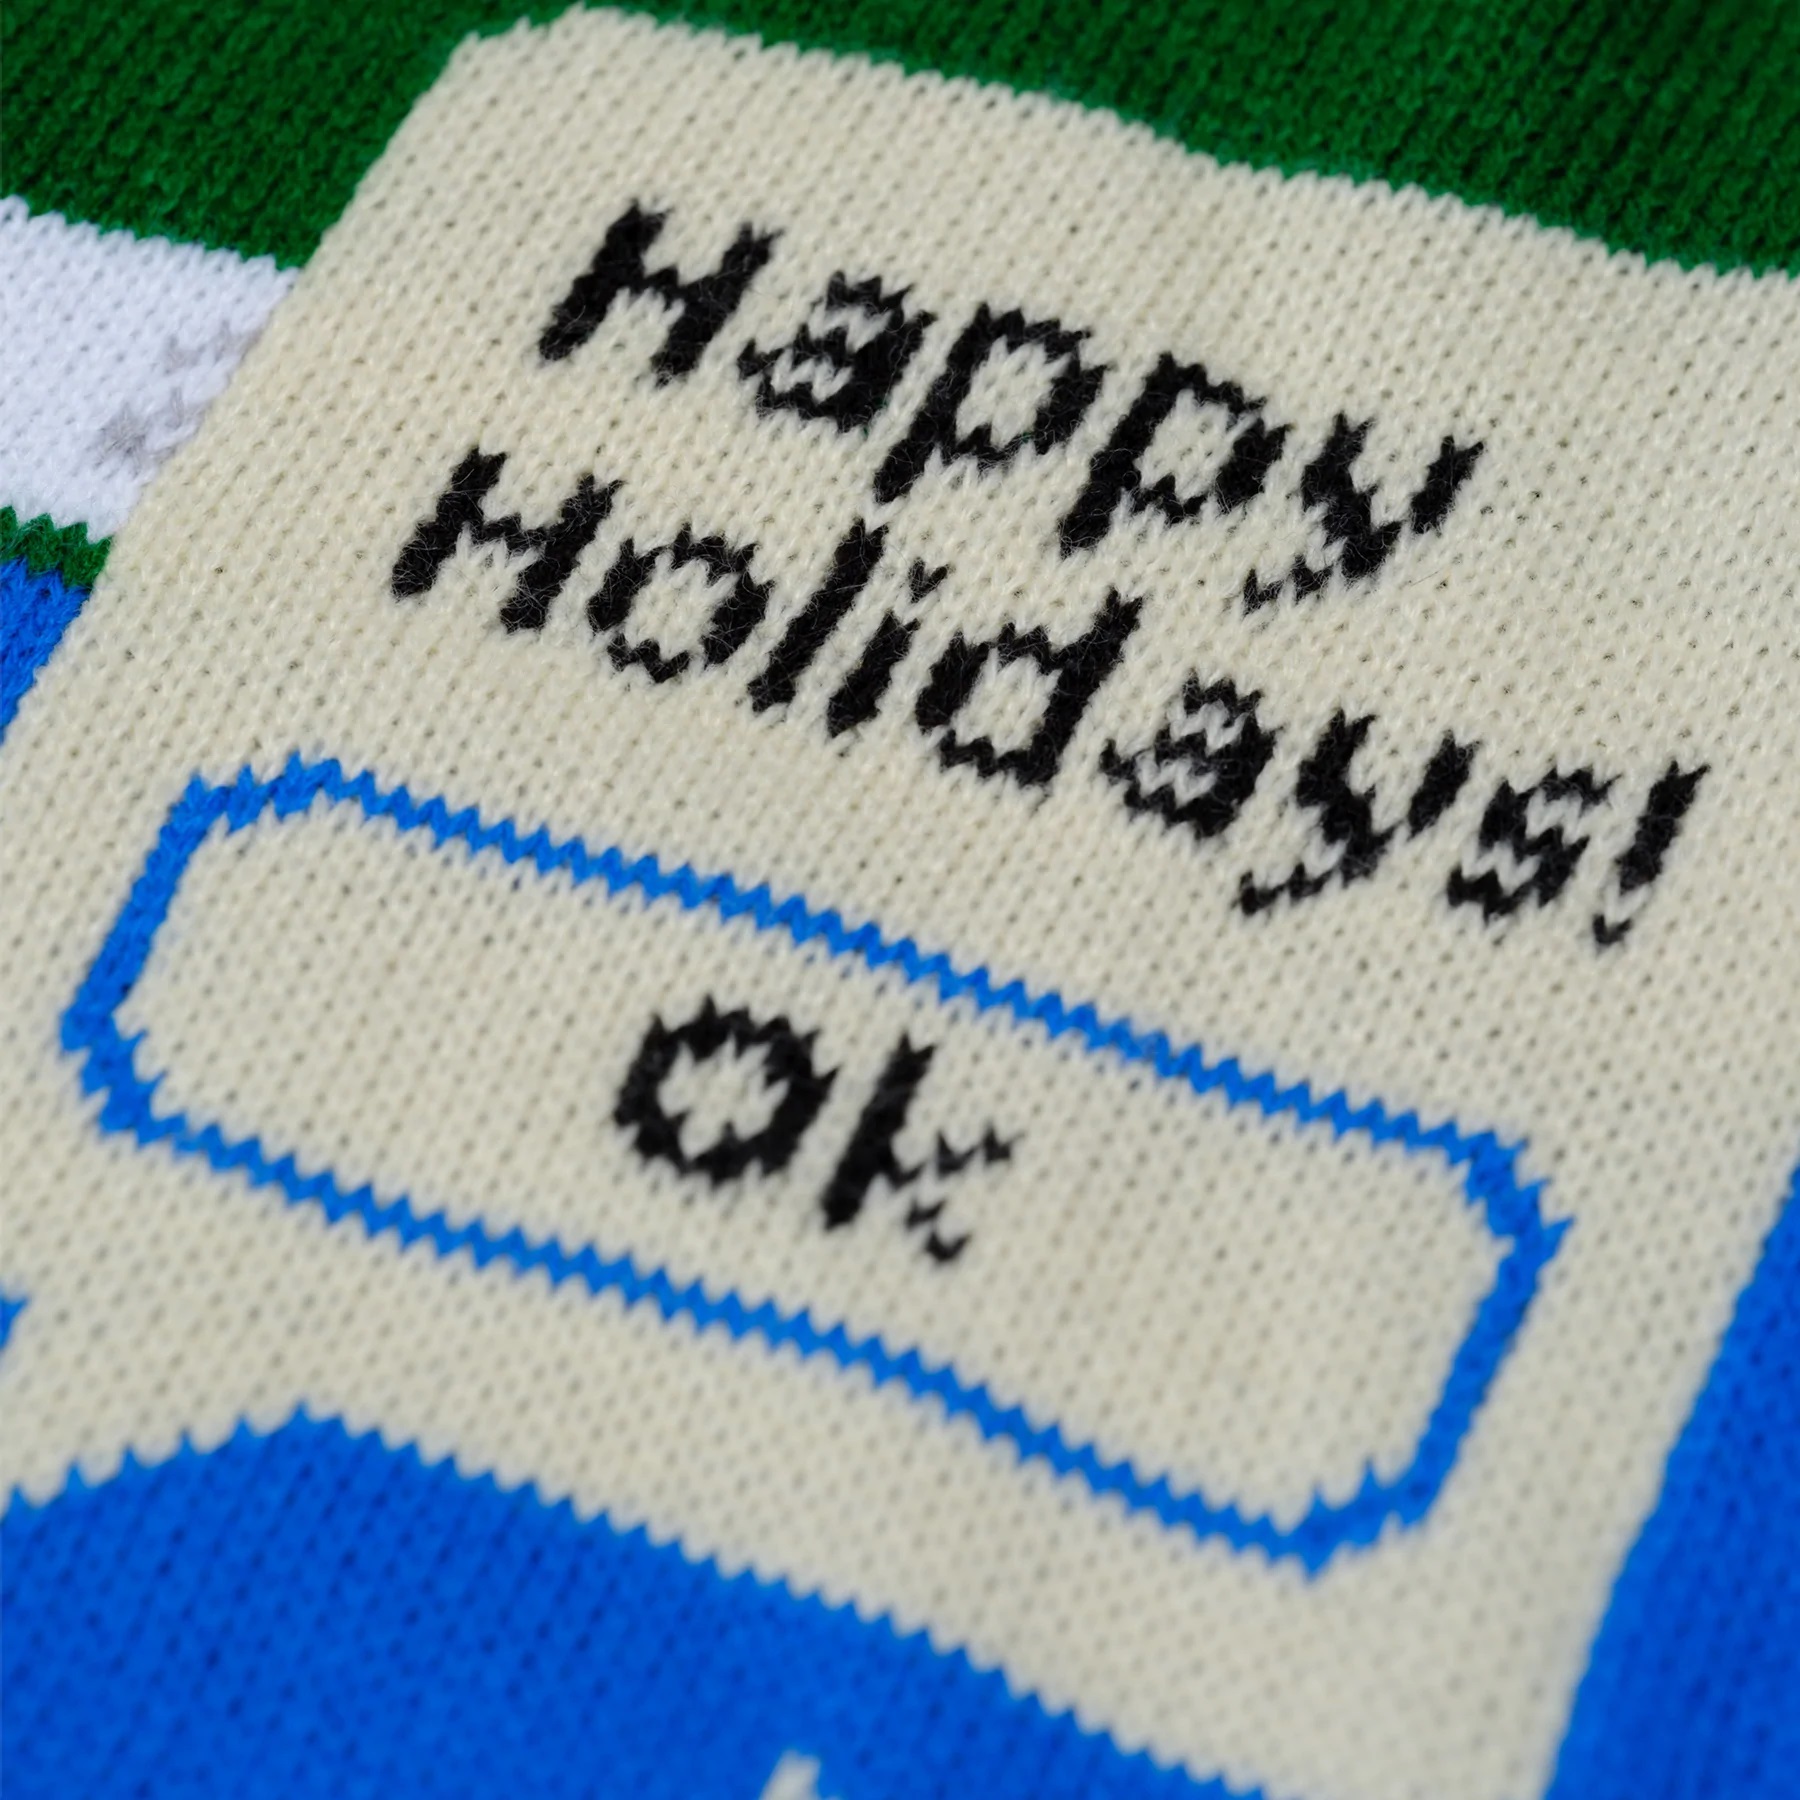 Microsoft released a Christmas "ugly sweater" with a talking Scrappy